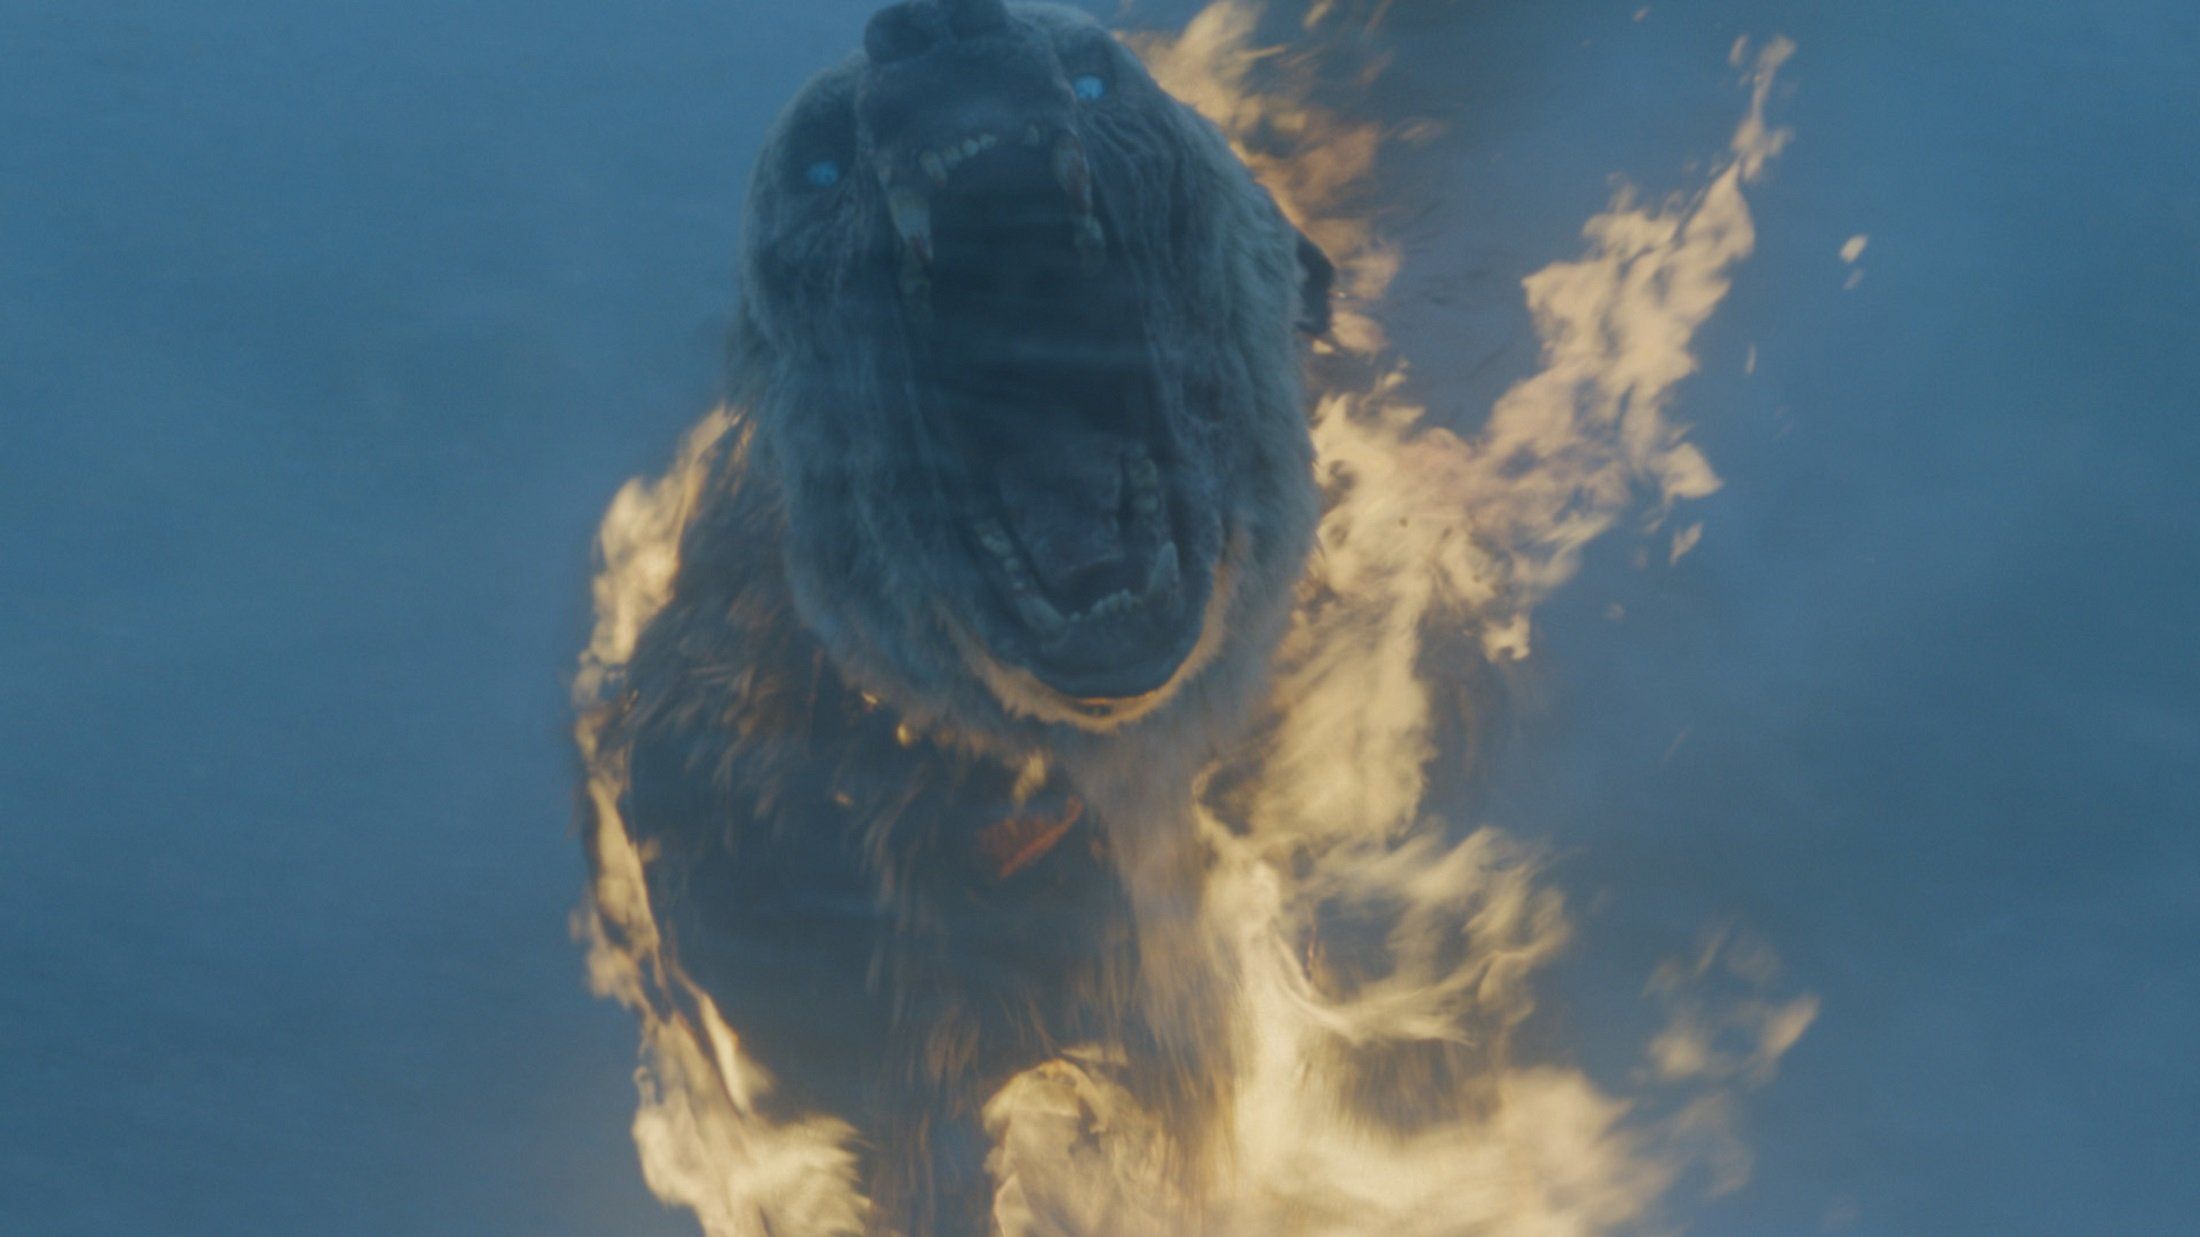 Loved The Game Of Thrones Showdown Between Dragons & White Walkers? Here's How It Was Created